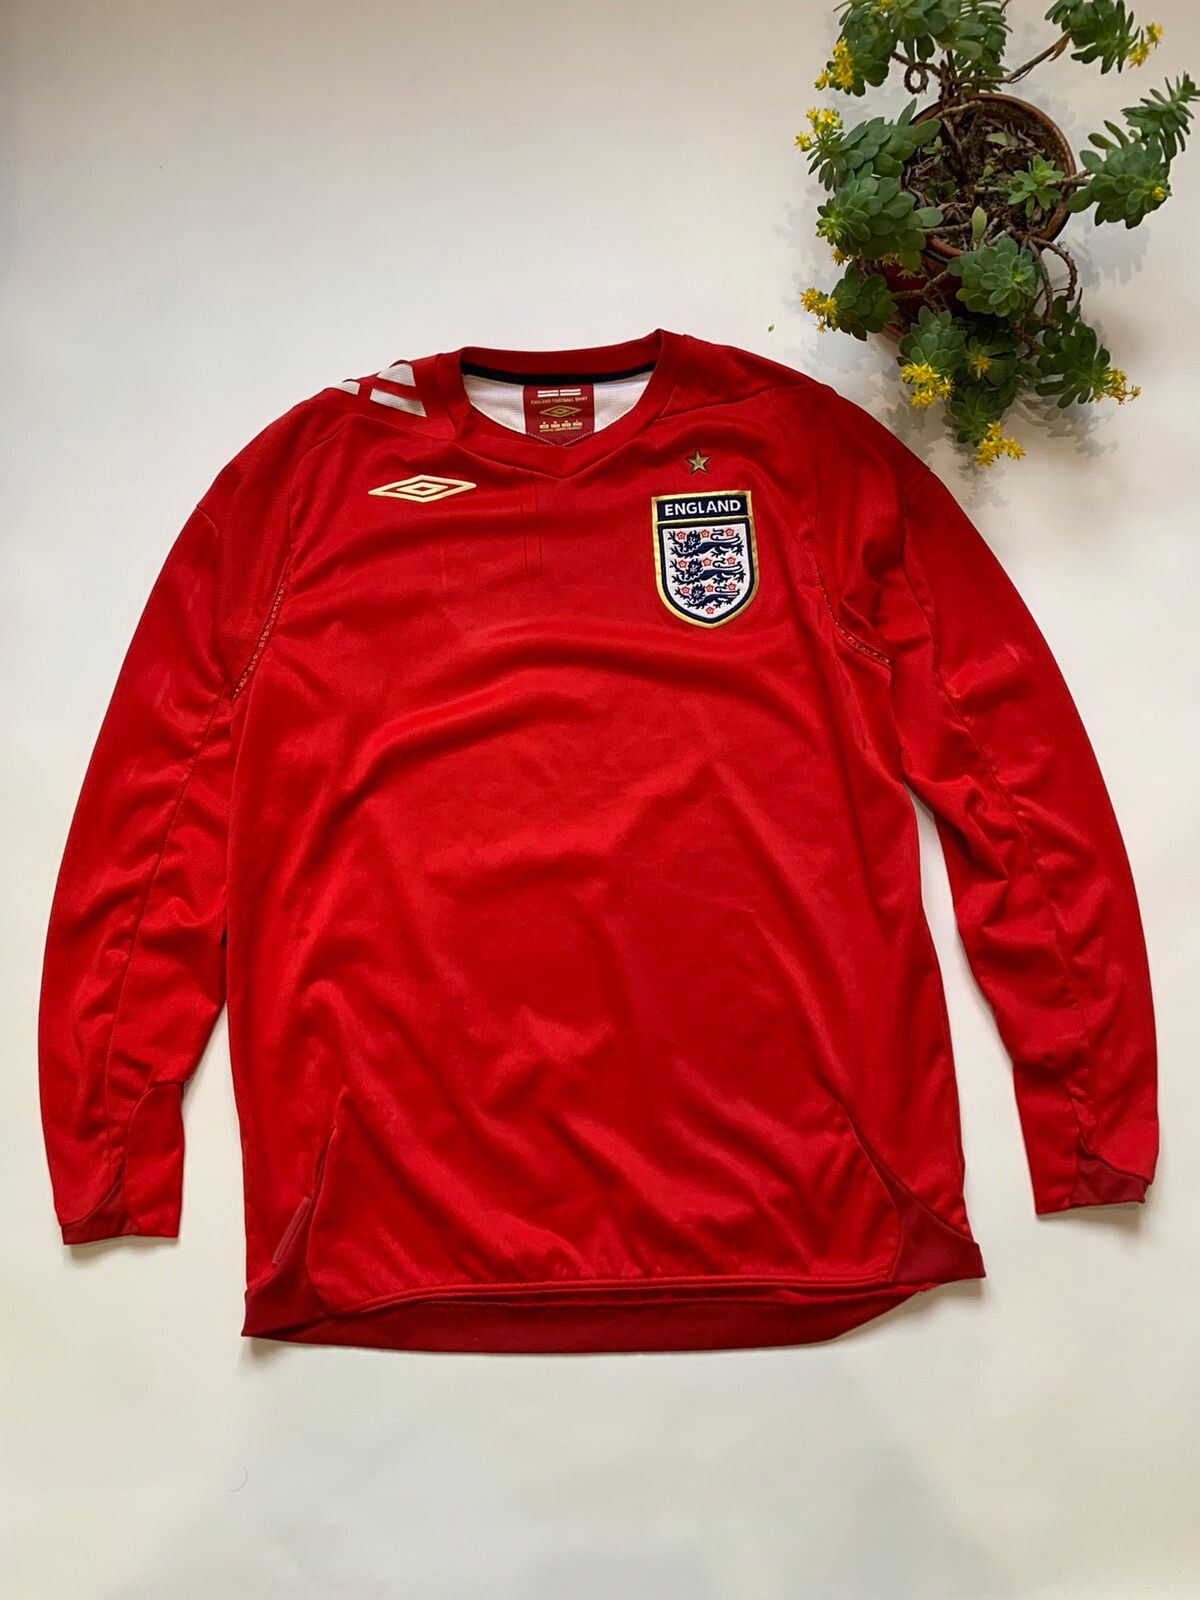 Pre-owned Soccer Jersey X Umbro Longsleeve Umbro England 2006 Away Kit Soccer Jersey In Red